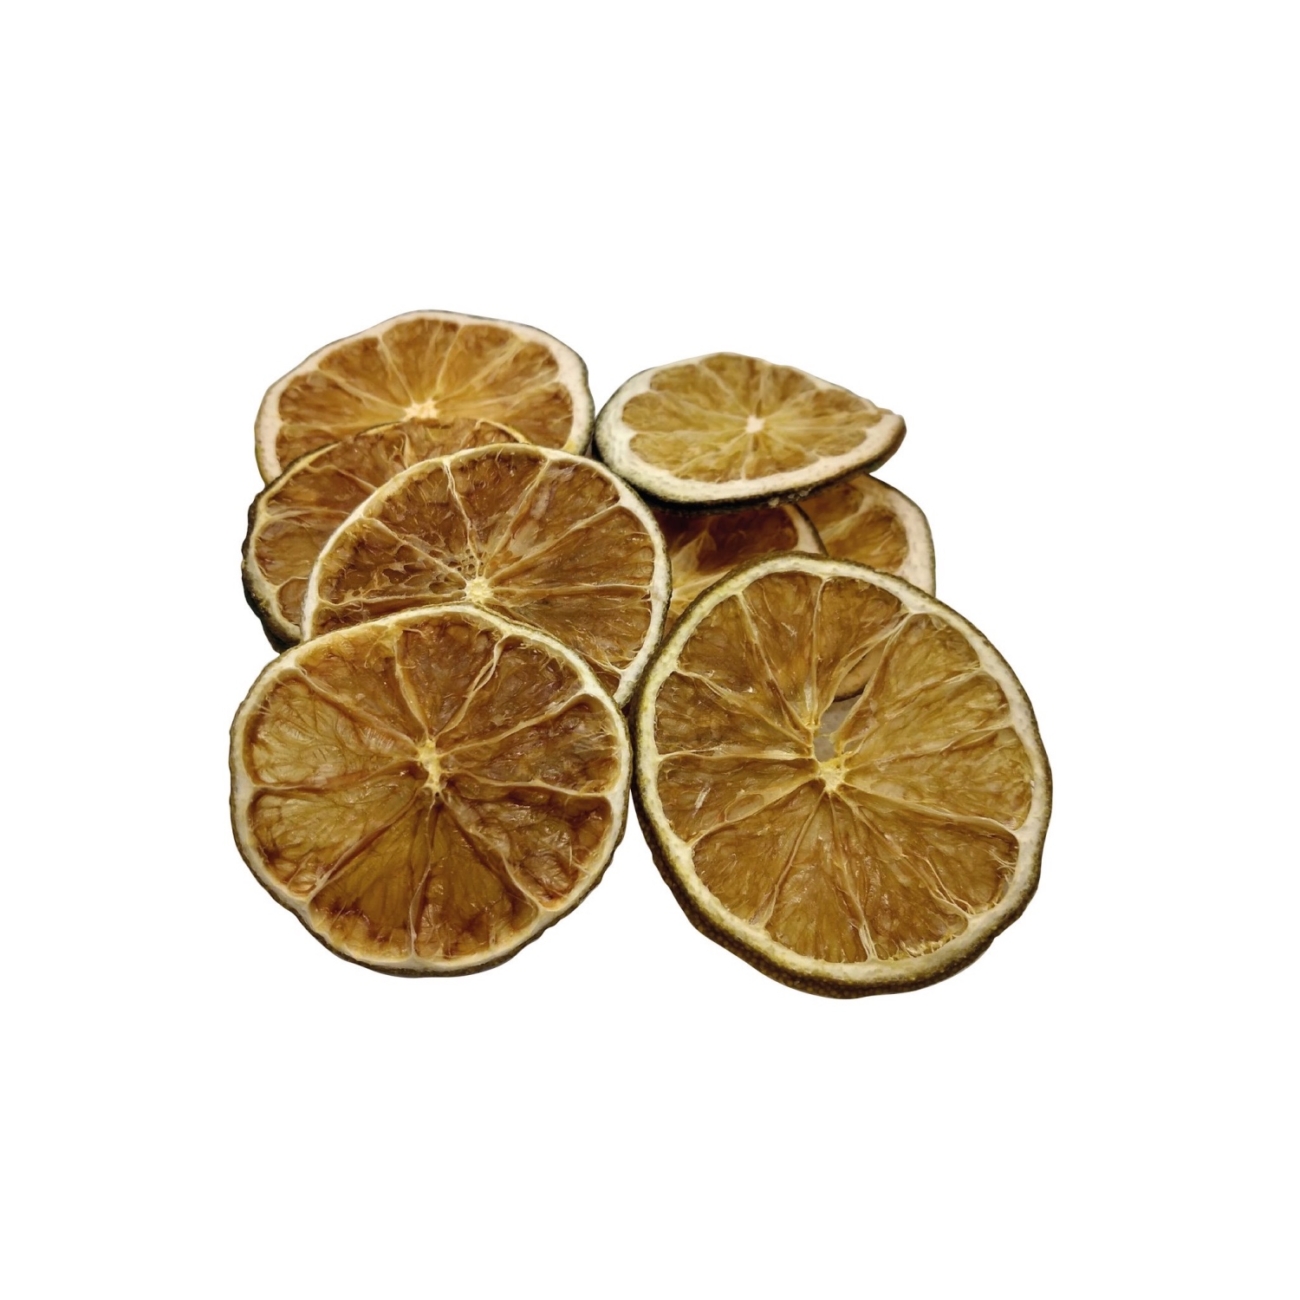 Homemade Dried Lemon Slices - From The Comfort Of My Bowl